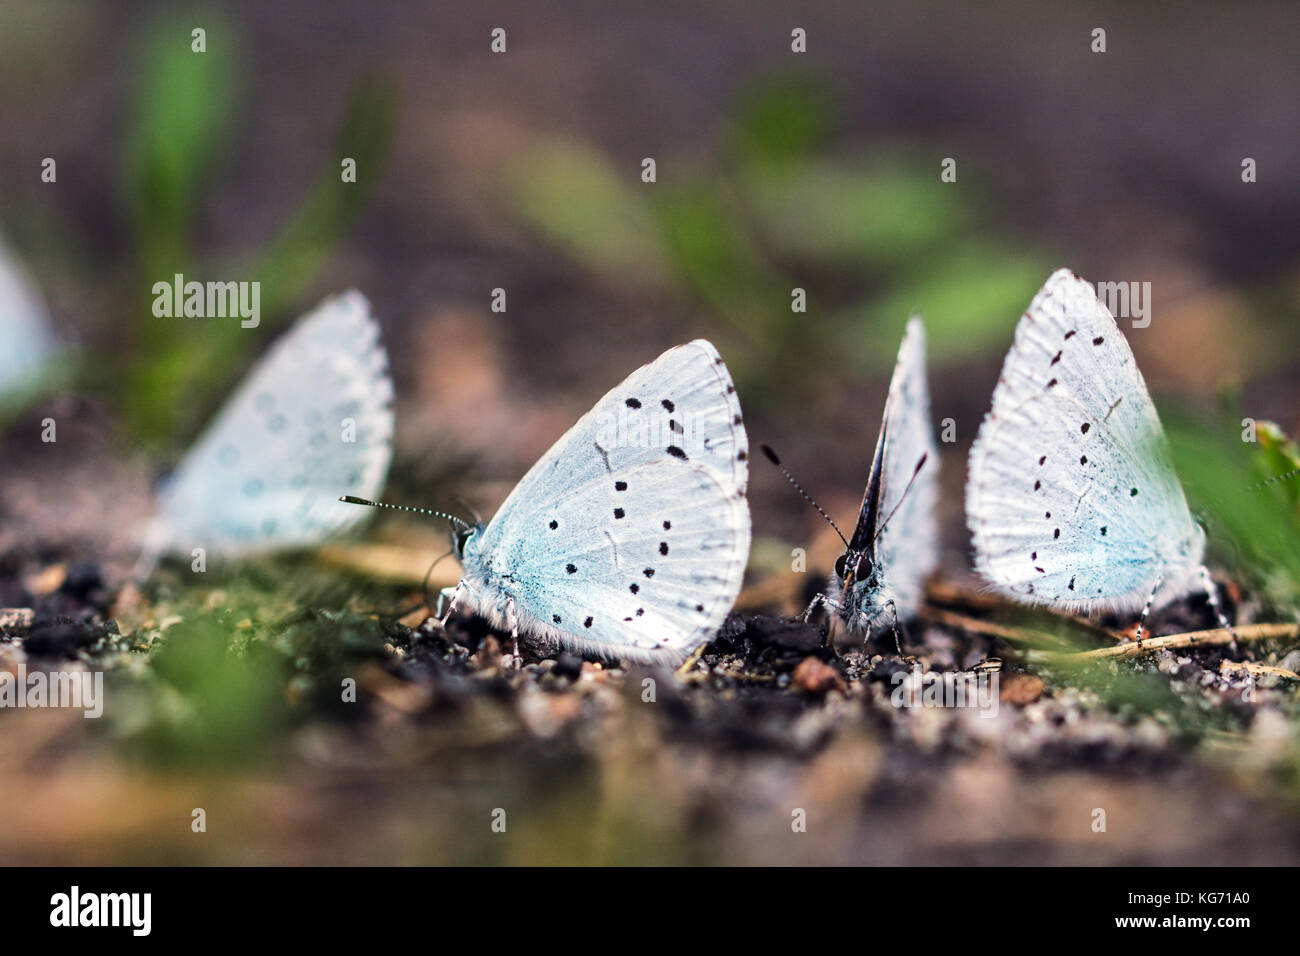 A group of blue butterflies on a forest path Stock Photo